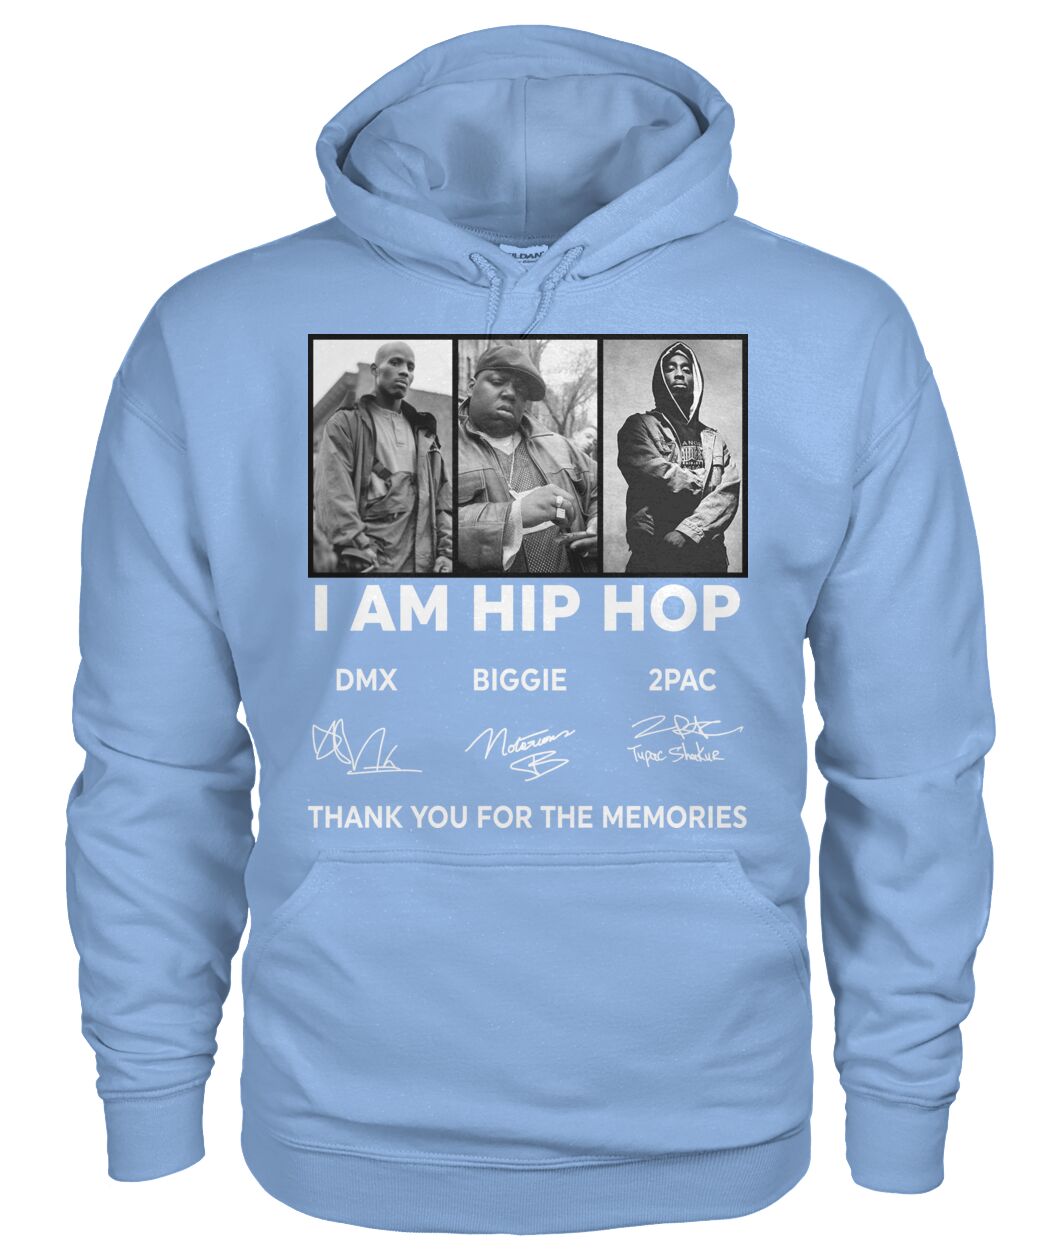 DMX Biggie 2PAC I am hip hop thank you for the memories hoodie